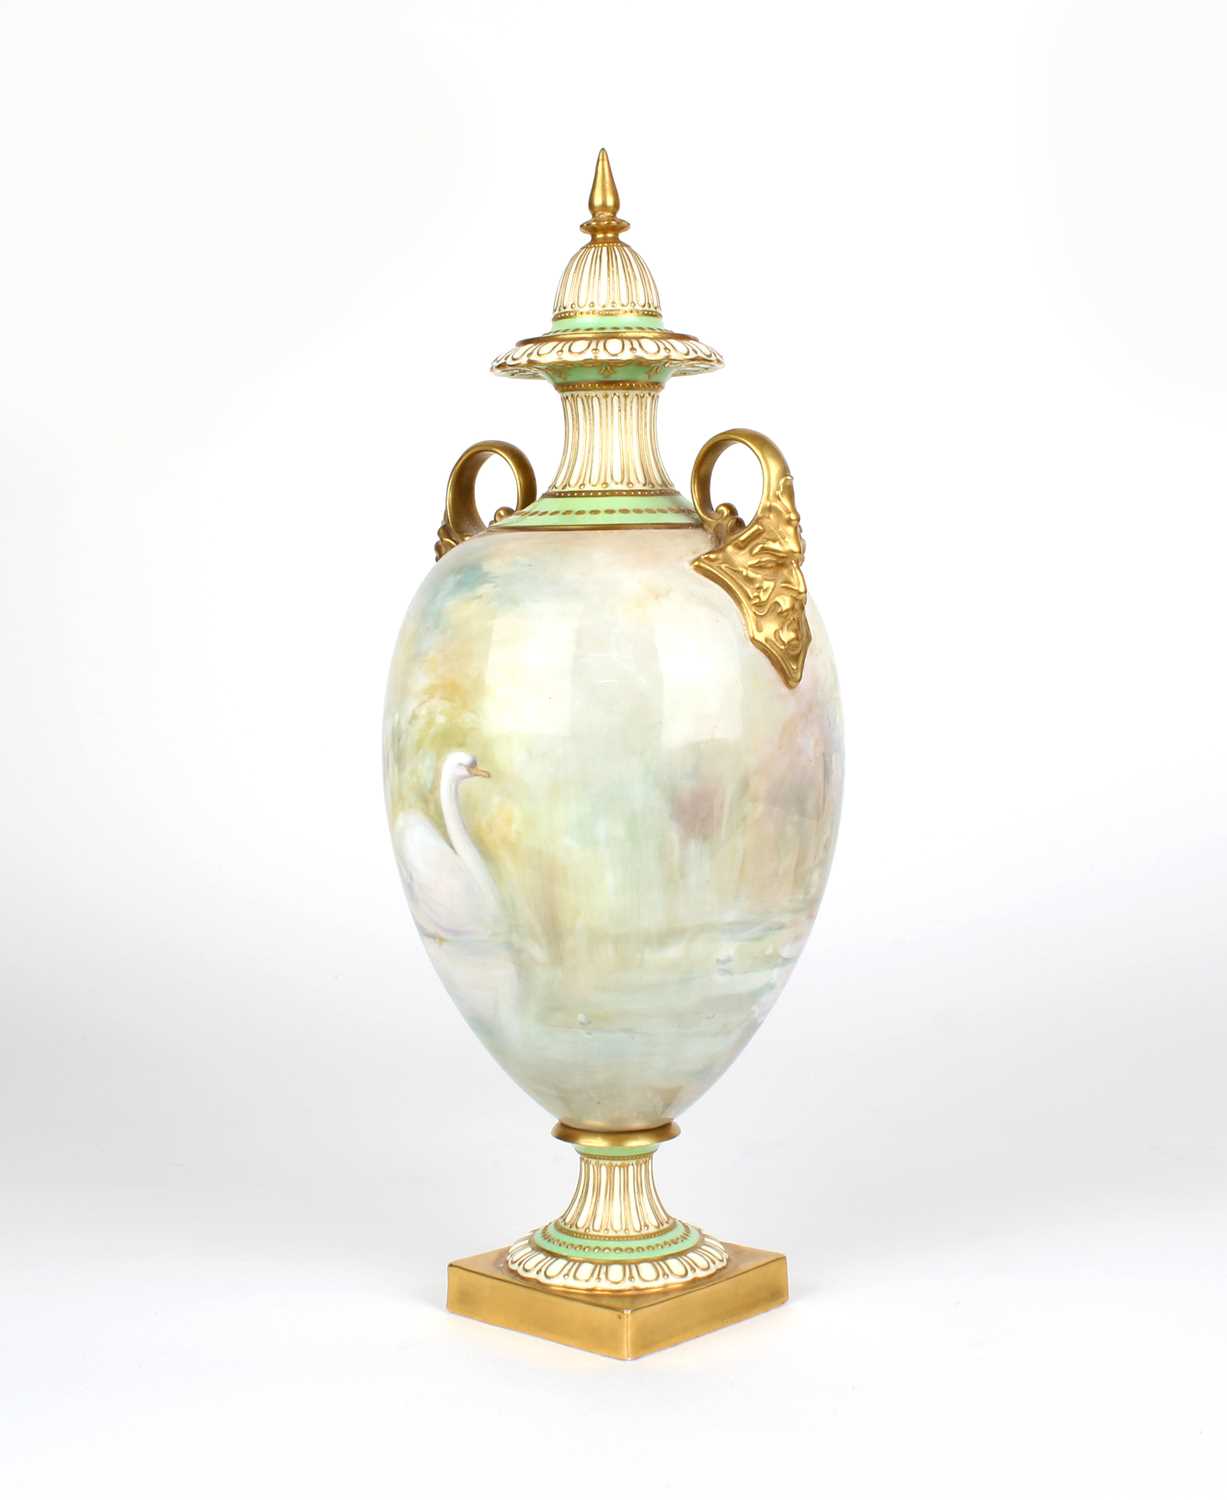 George White for Royal Doulton "Leda and the Swan" Urn - Image 6 of 20